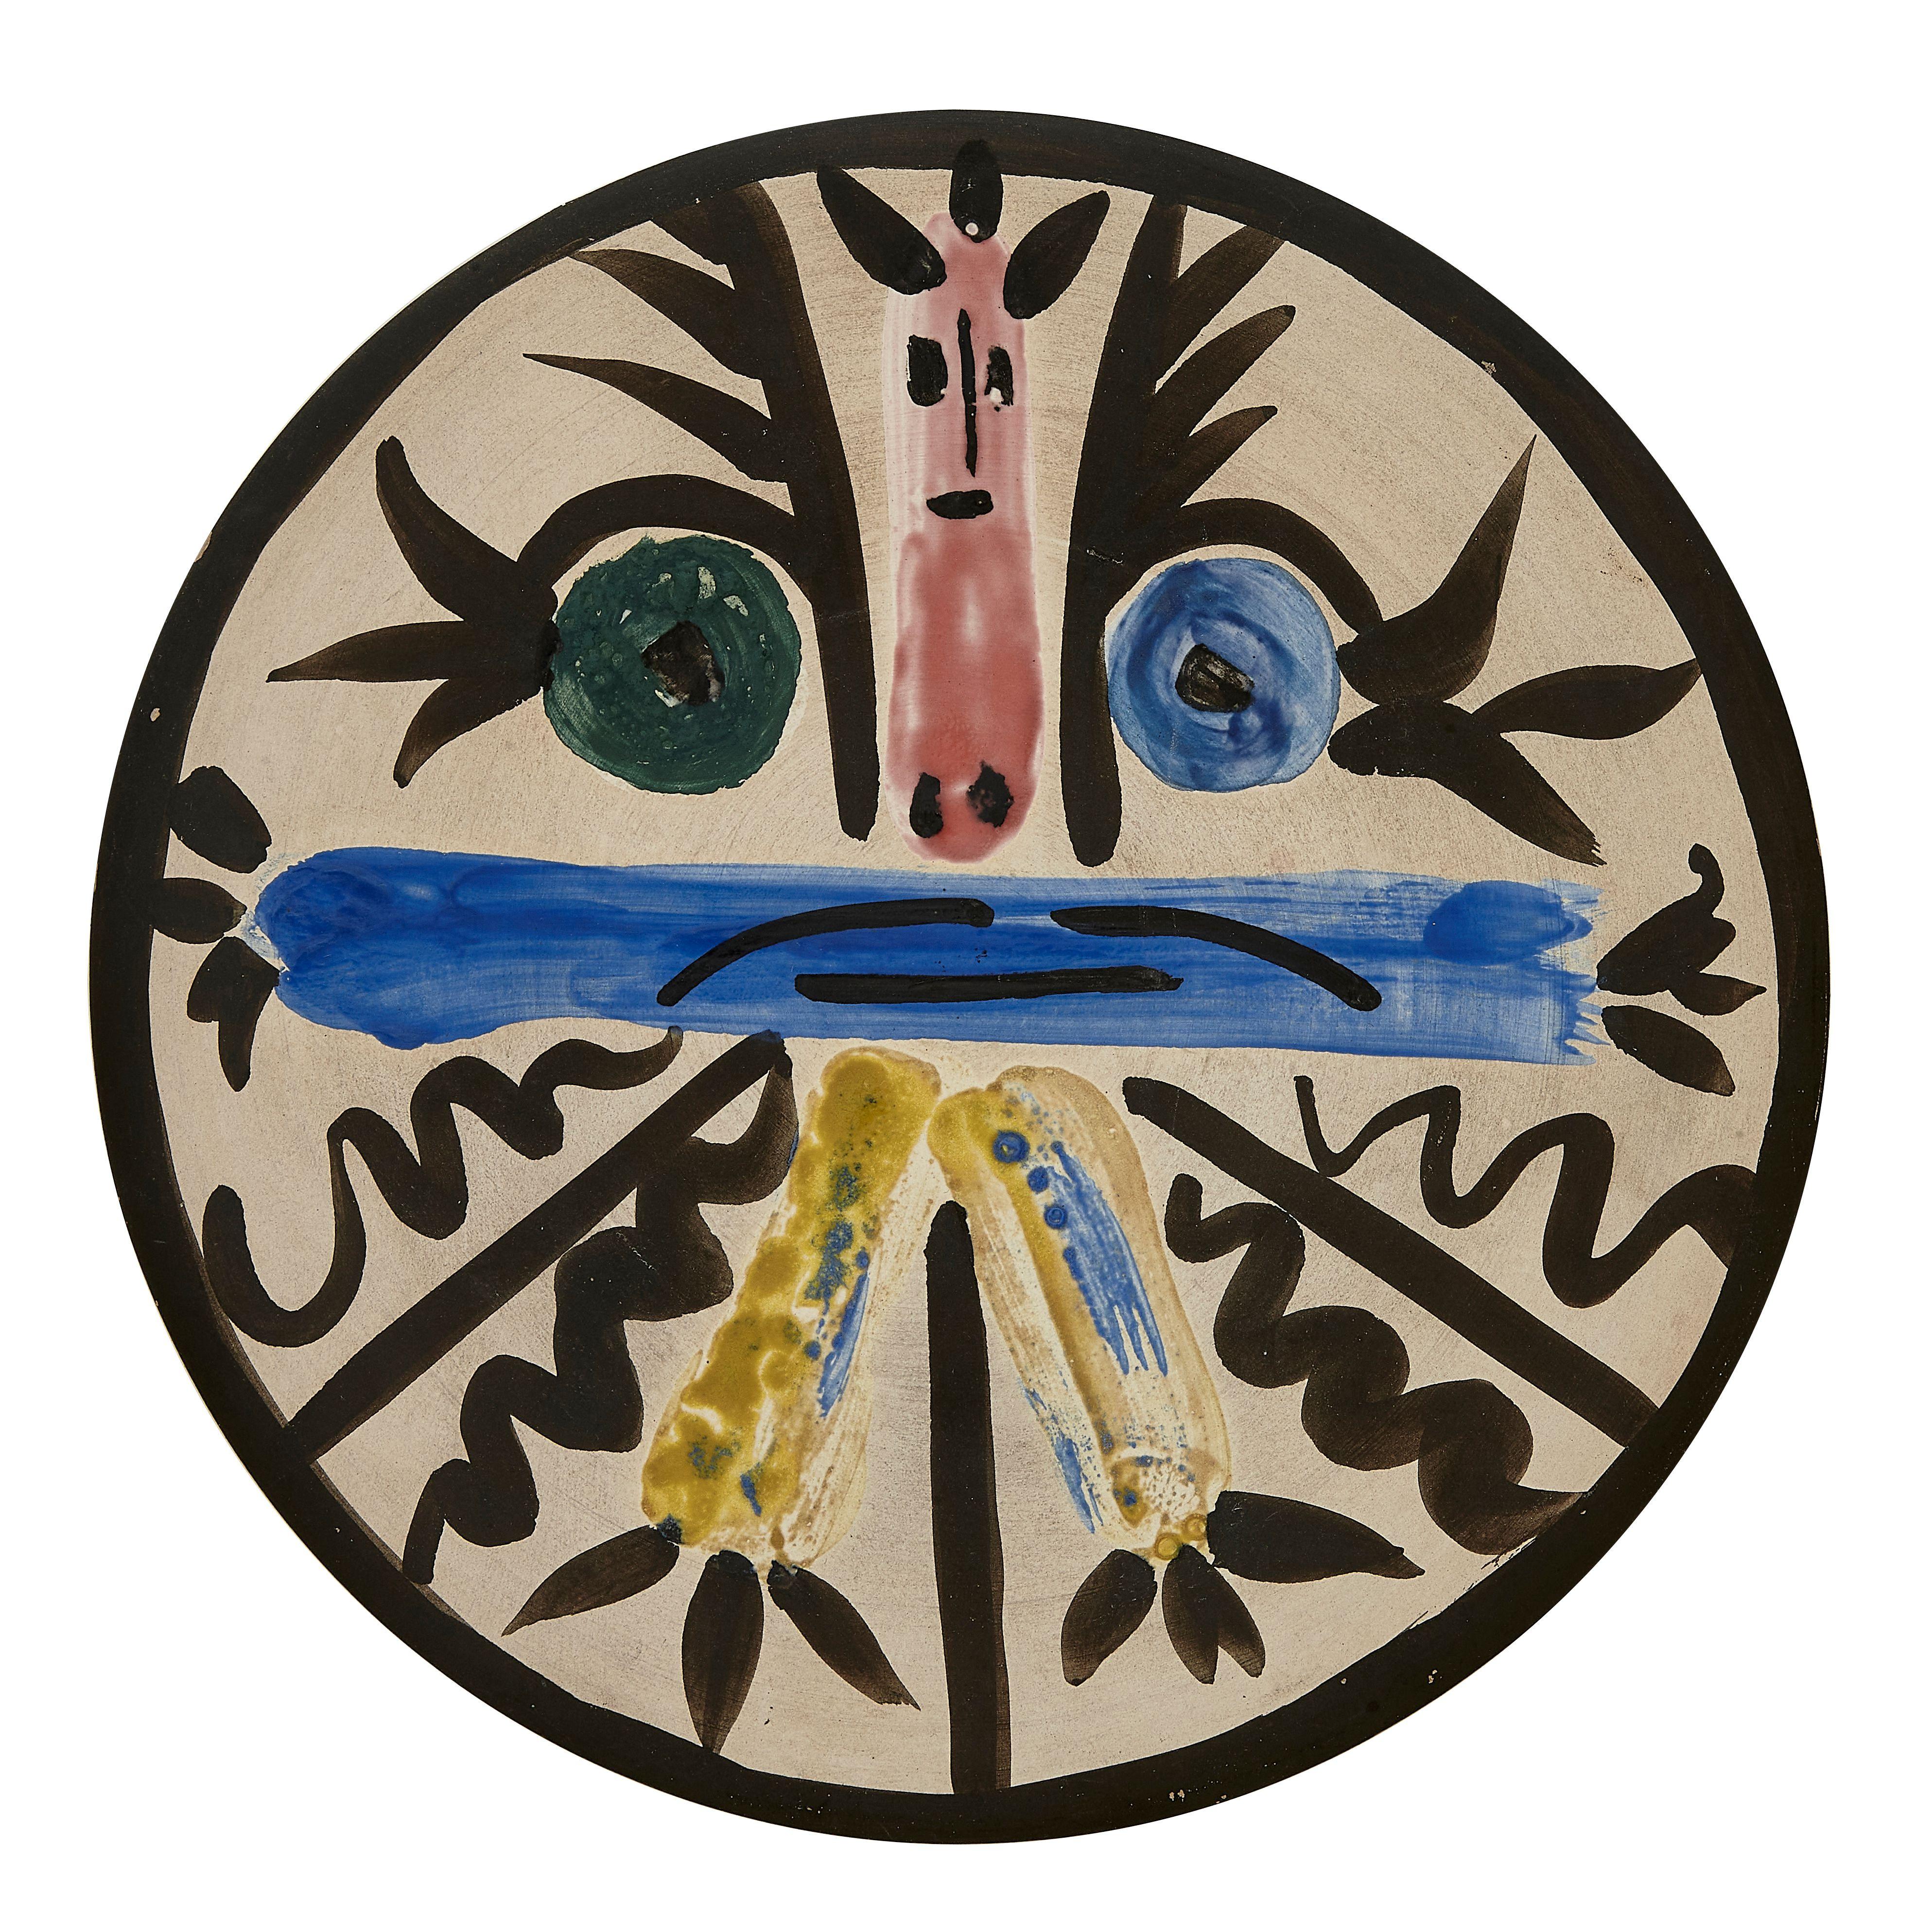 PABLO PICASSO (1881-1973) 
Personnages no. 28 (A. R. 463) 

Terre de faïence plate, painted in colors and partially glazed, 1963, numbered 134/150 and inscribed 'No 28', 'Edition Picasso' and 'Madoura'.